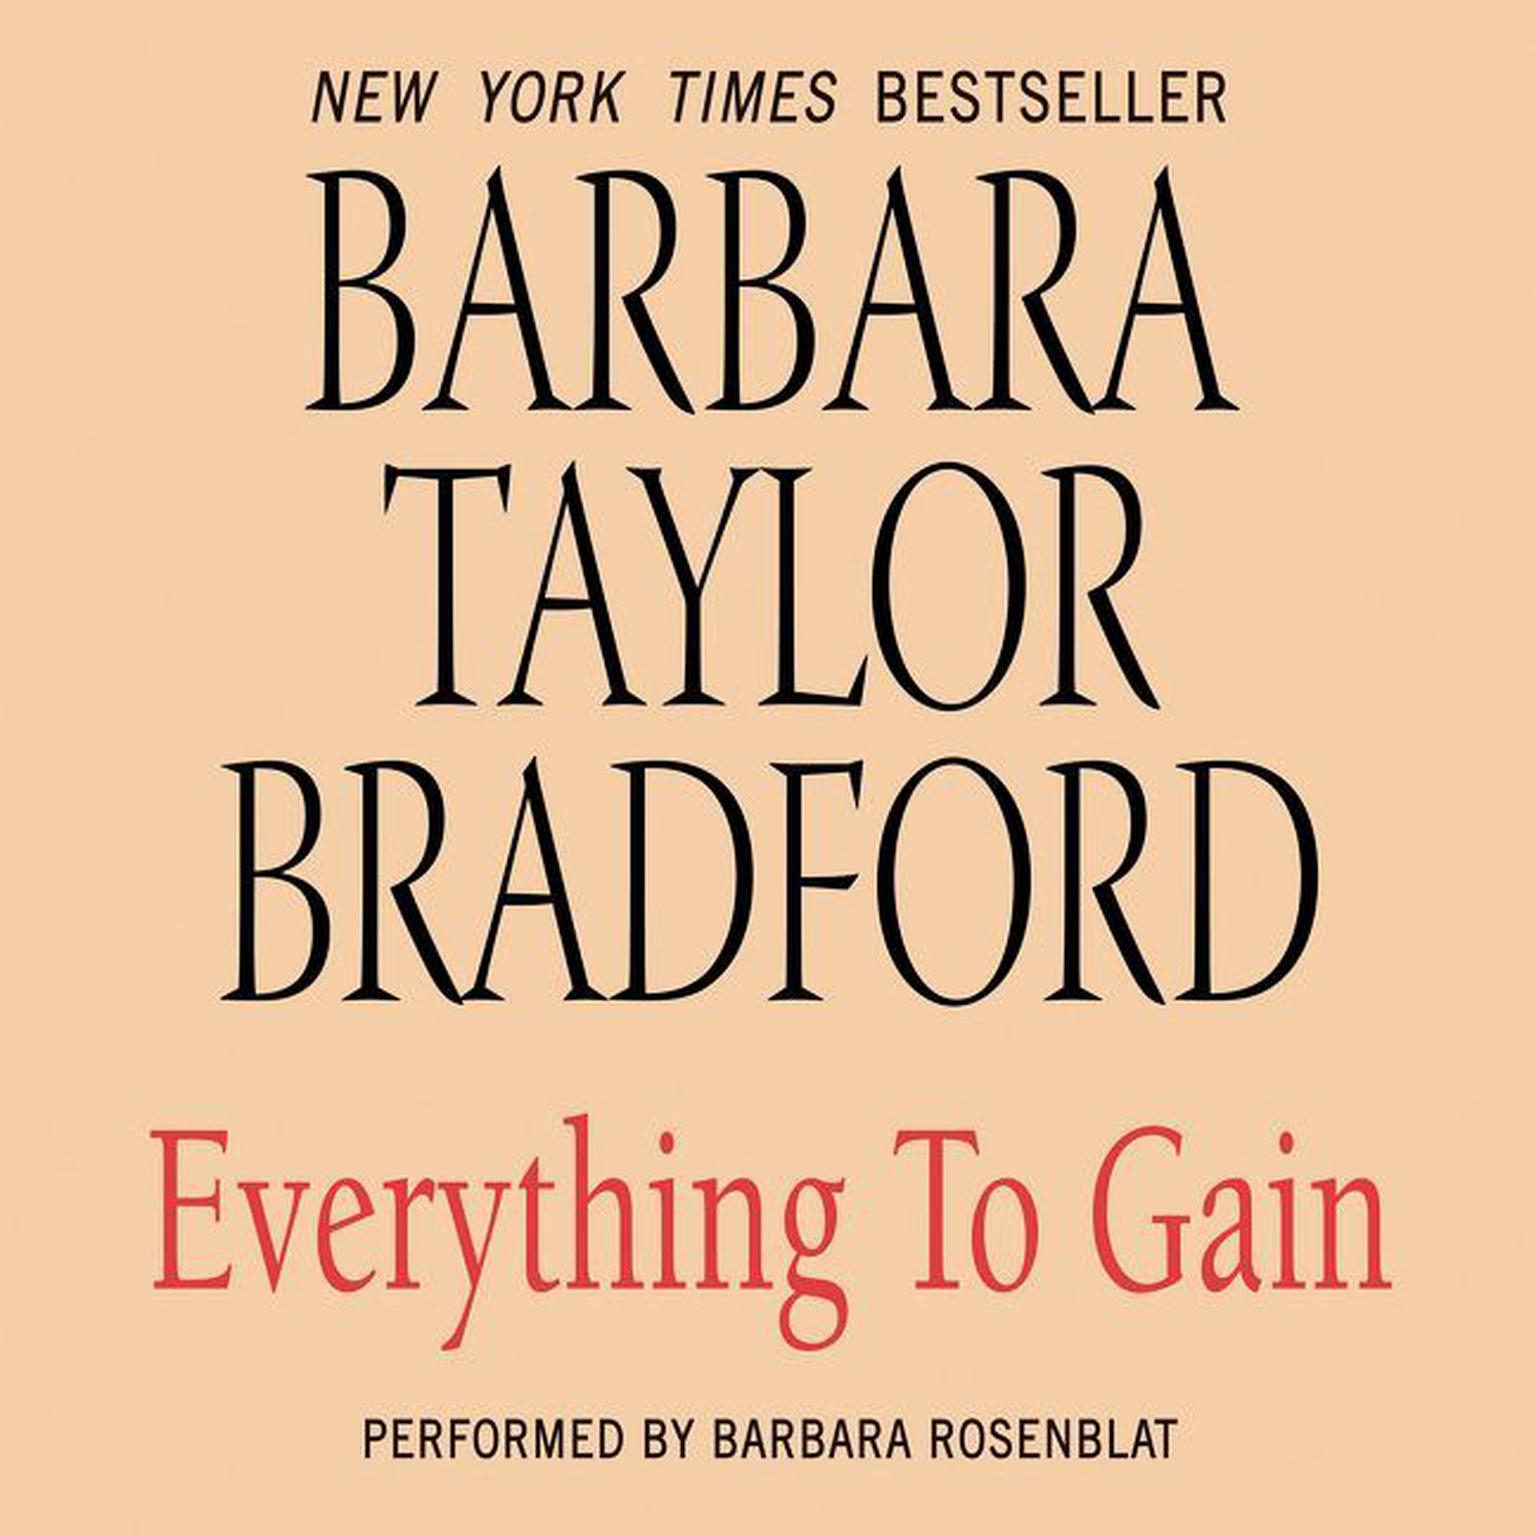 Everything to Gain Audiobook, by Barbara Taylor Bradford